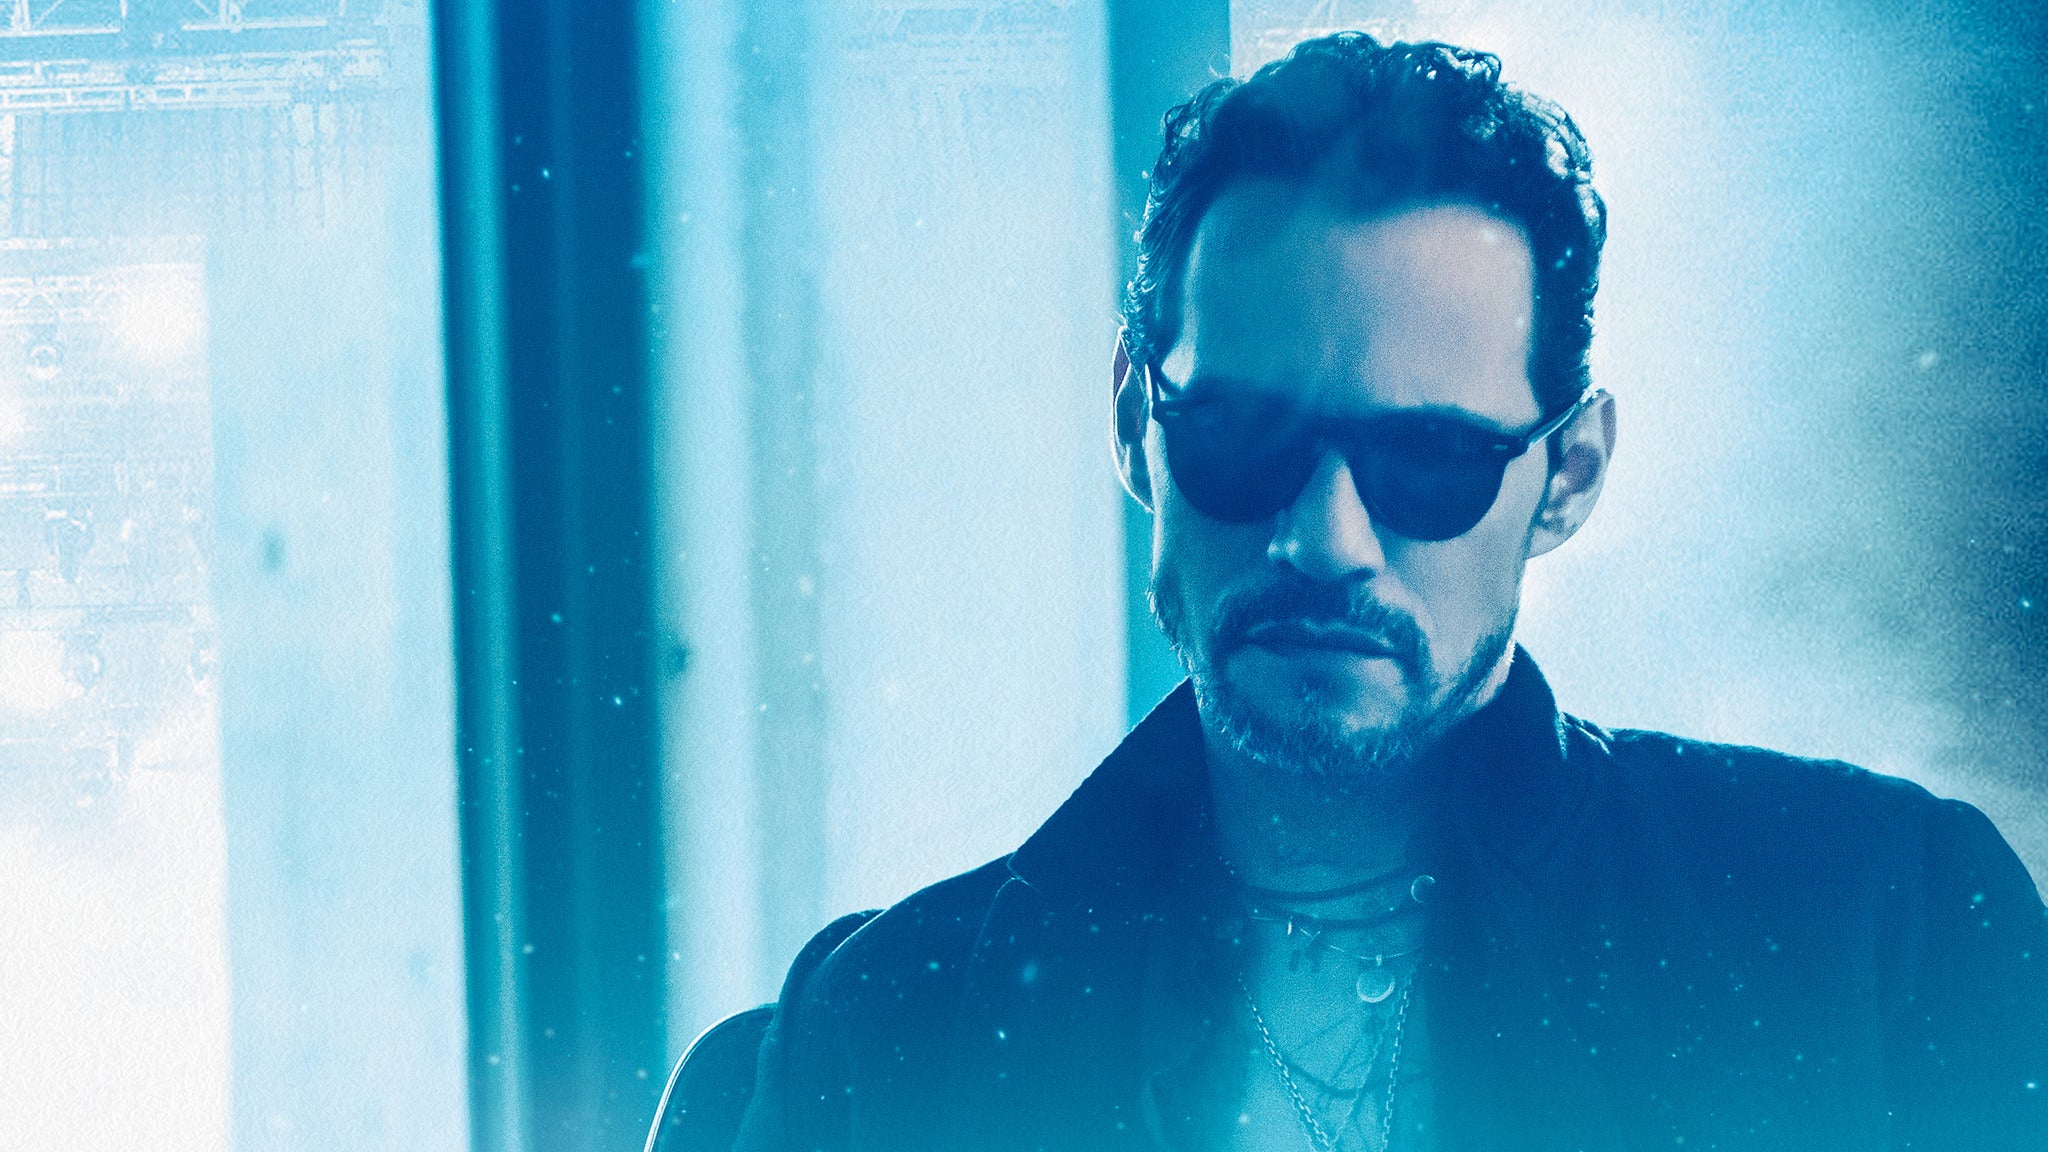 Marc Anthony Concert 2022 Schedule Marc Anthony Tickets, 2022 Concert Tour Dates | Ticketmaster Ca